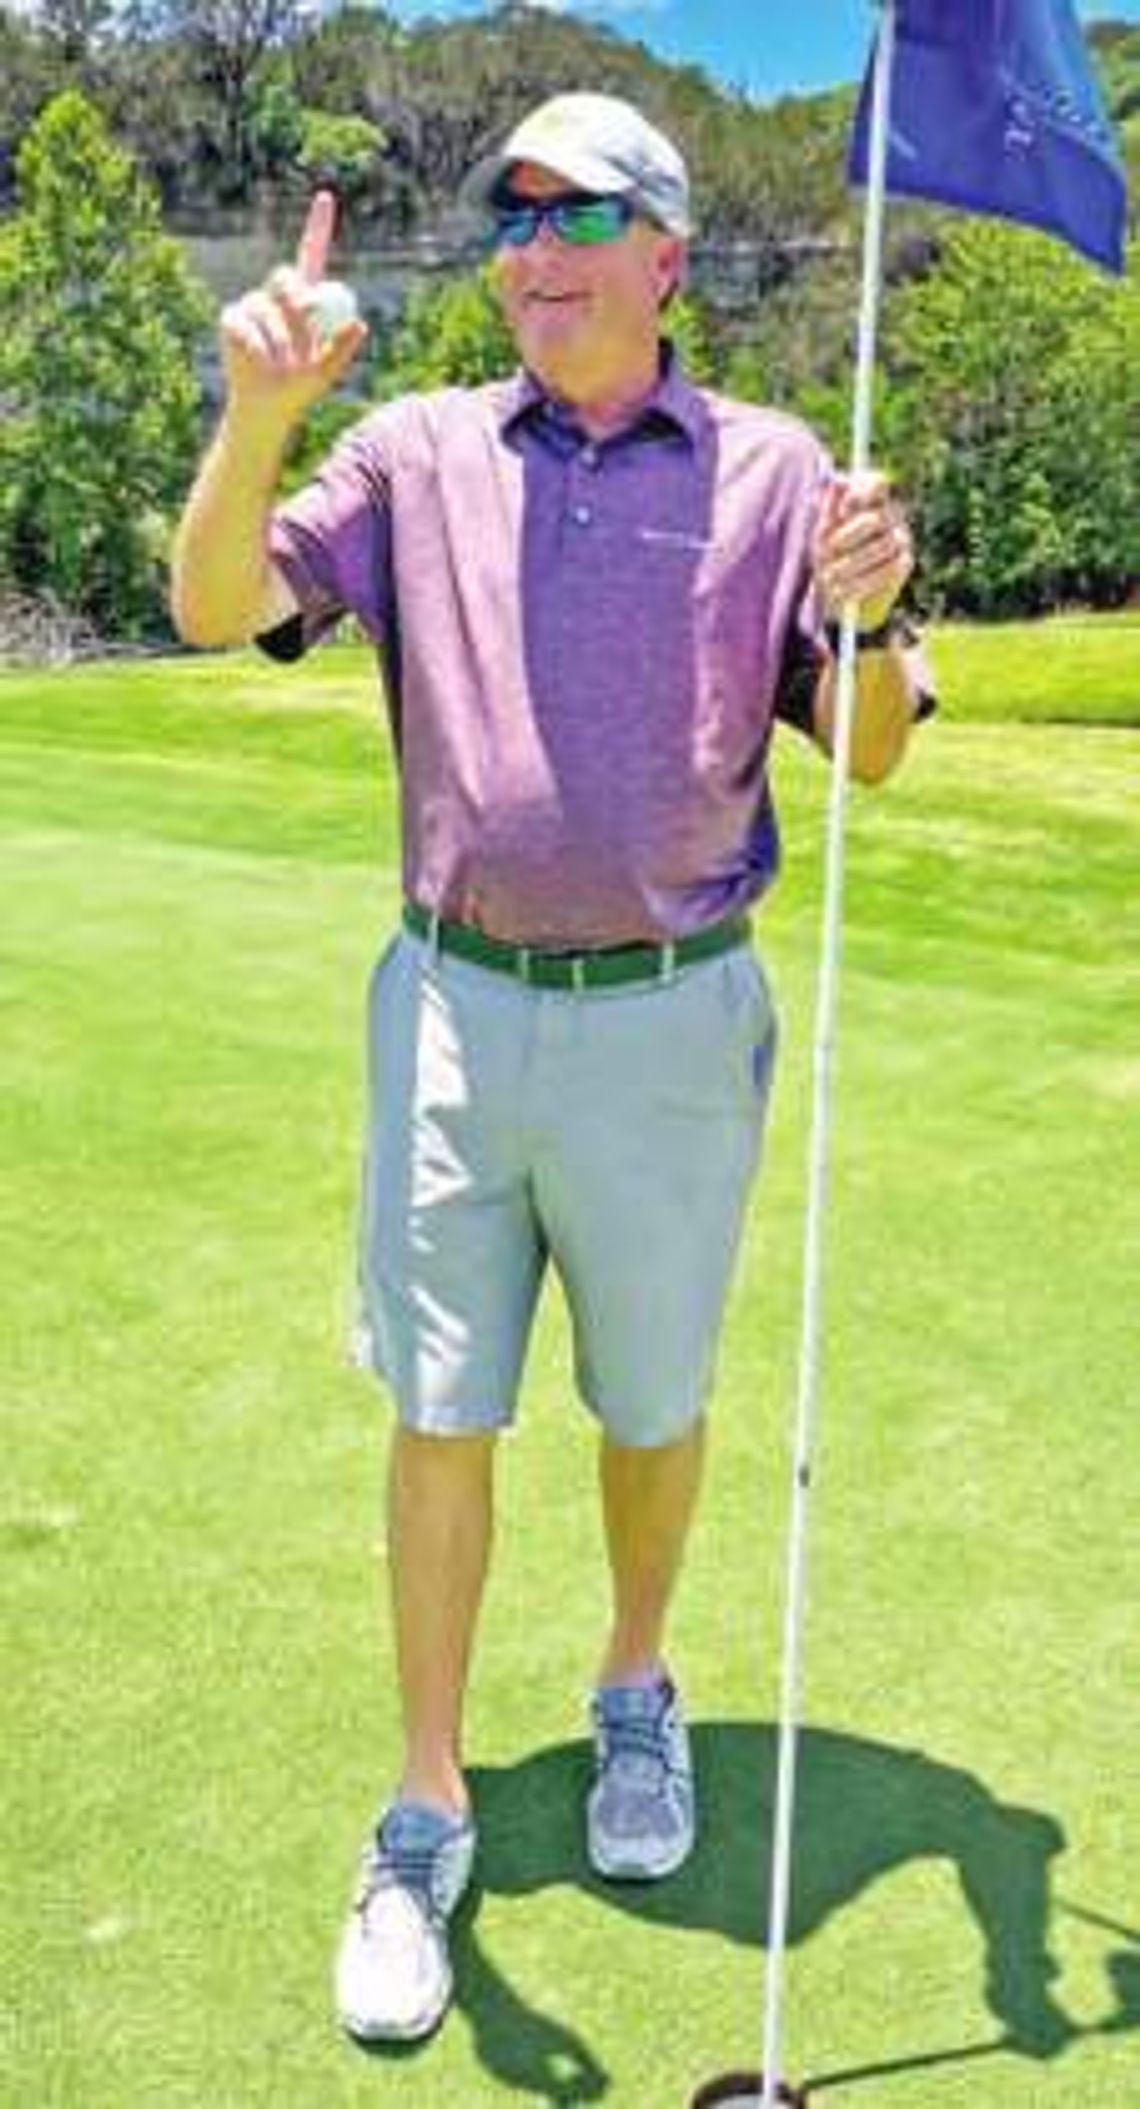 Halbert aces hole No. 3 at Tapatio Springs golf course